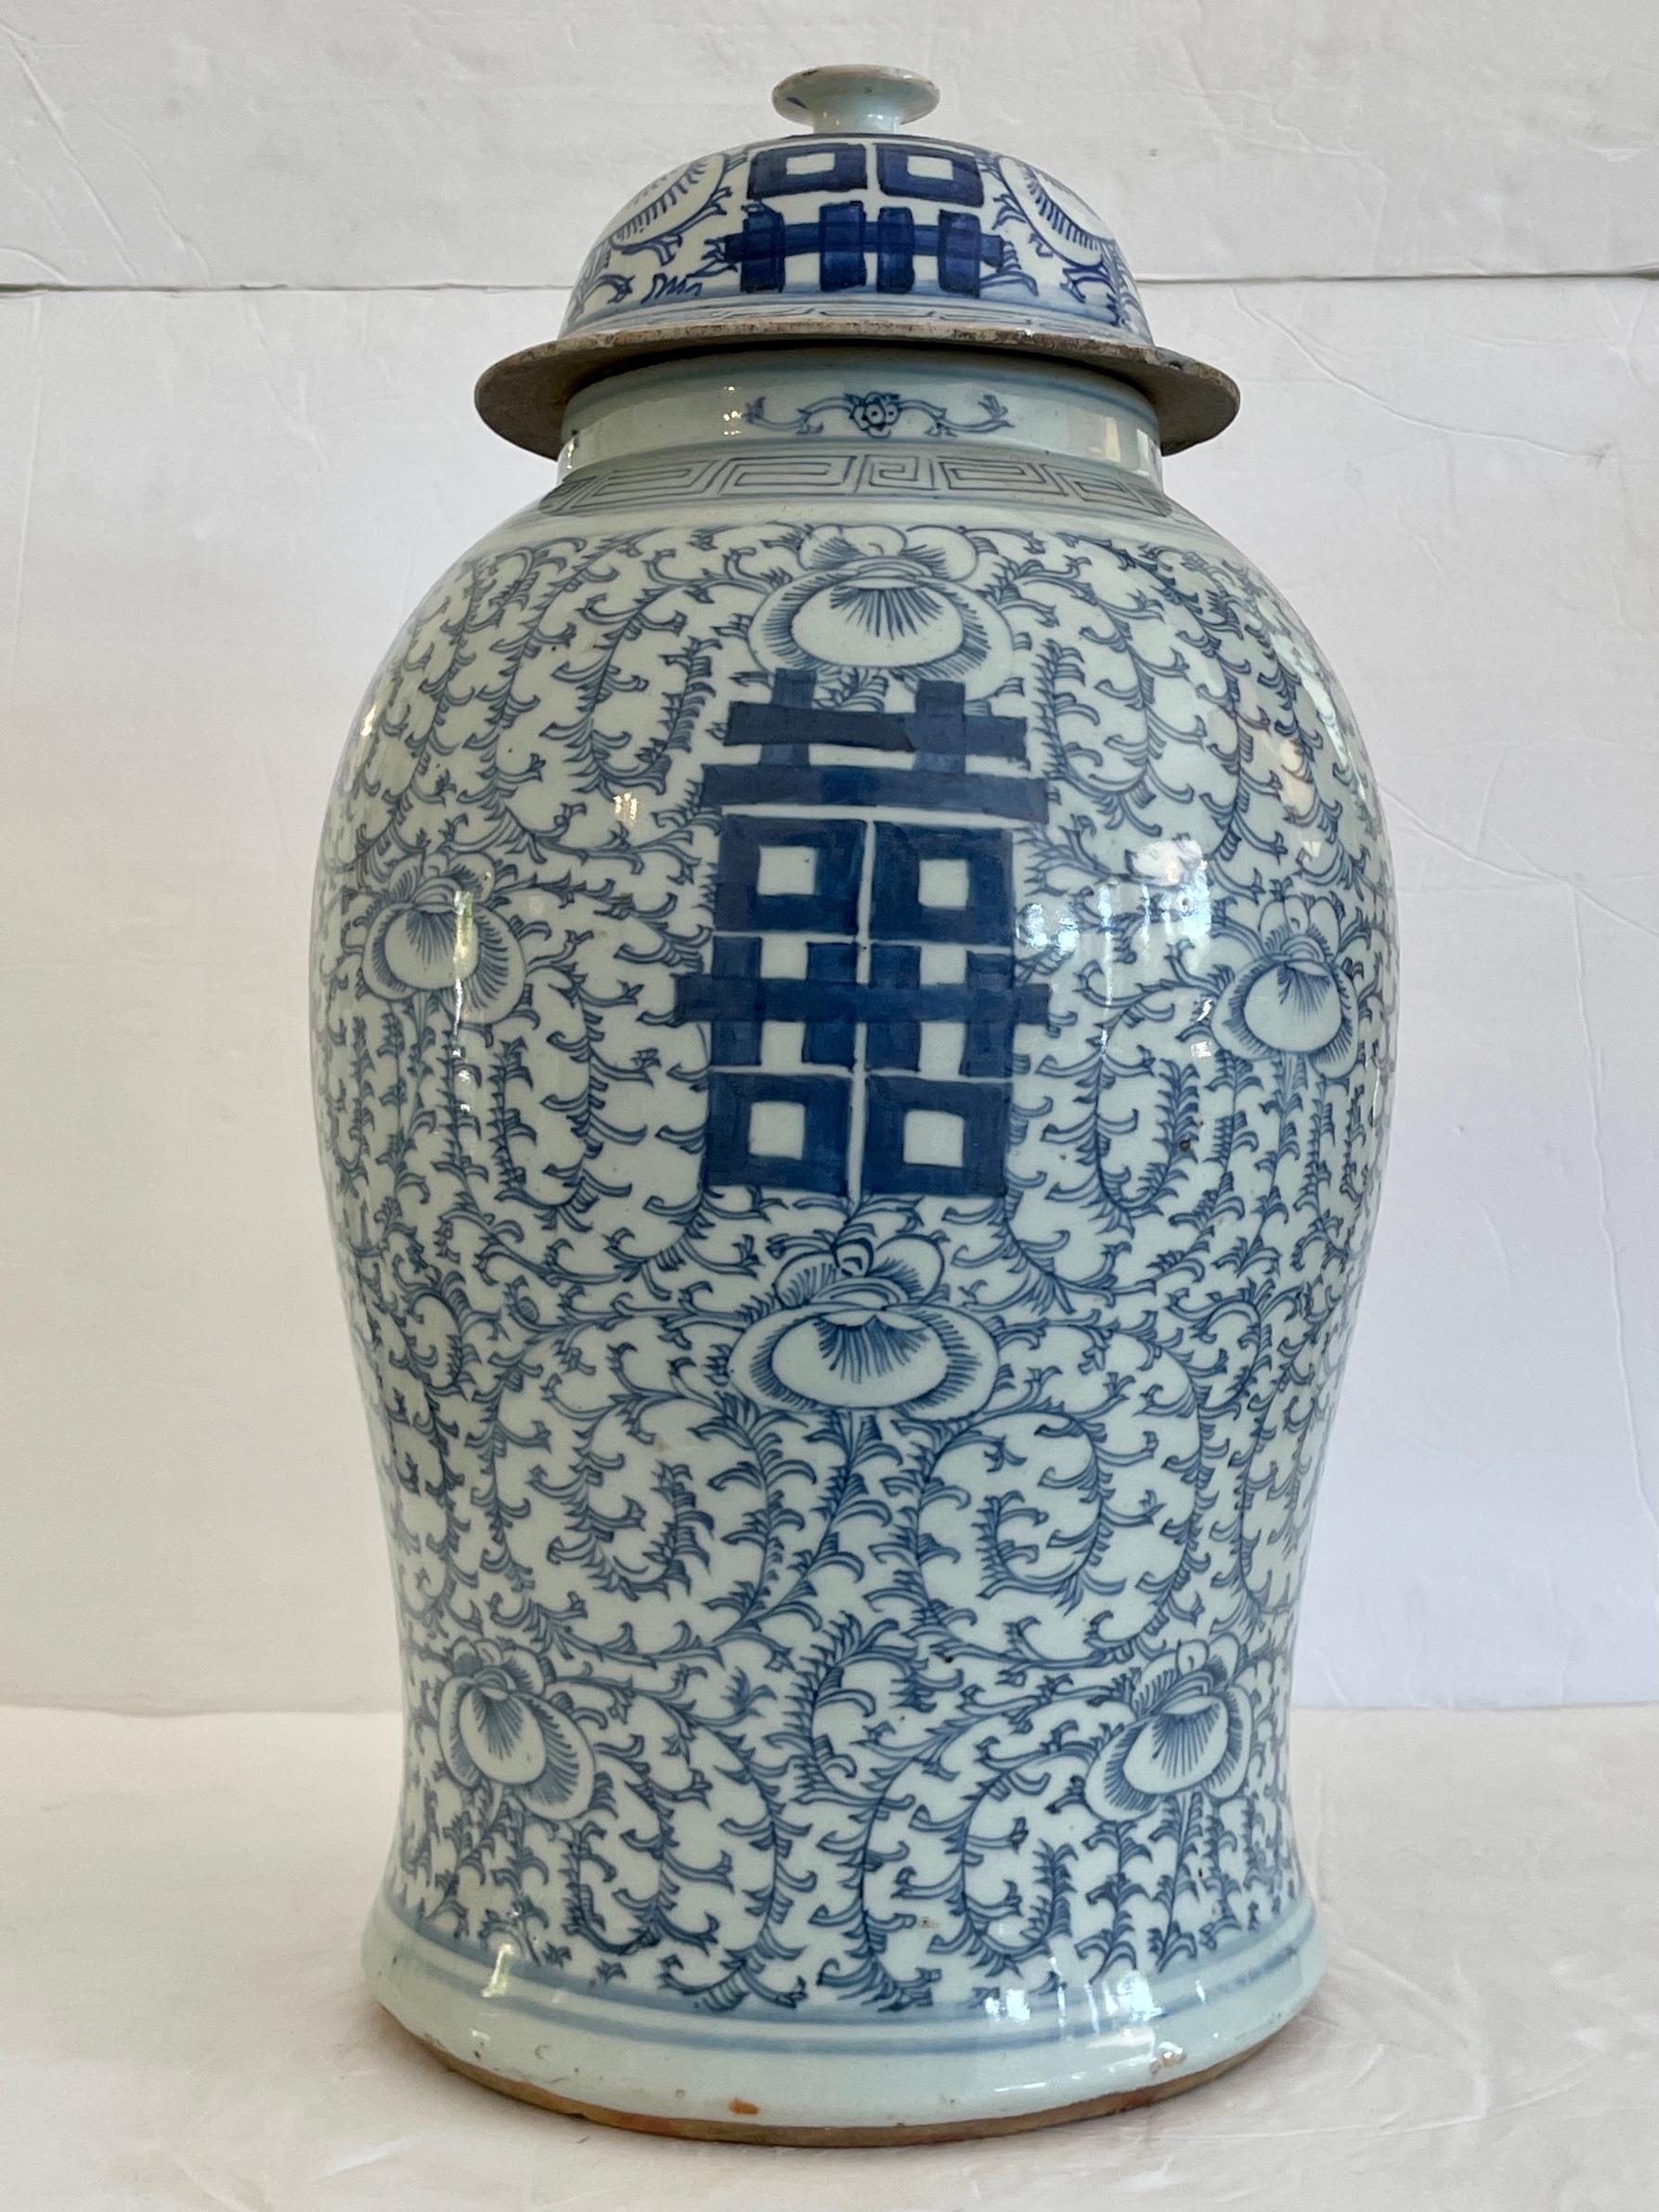 Blue and white Asian ceramic jar vase with cover. Add some Asian decor to your interiors.